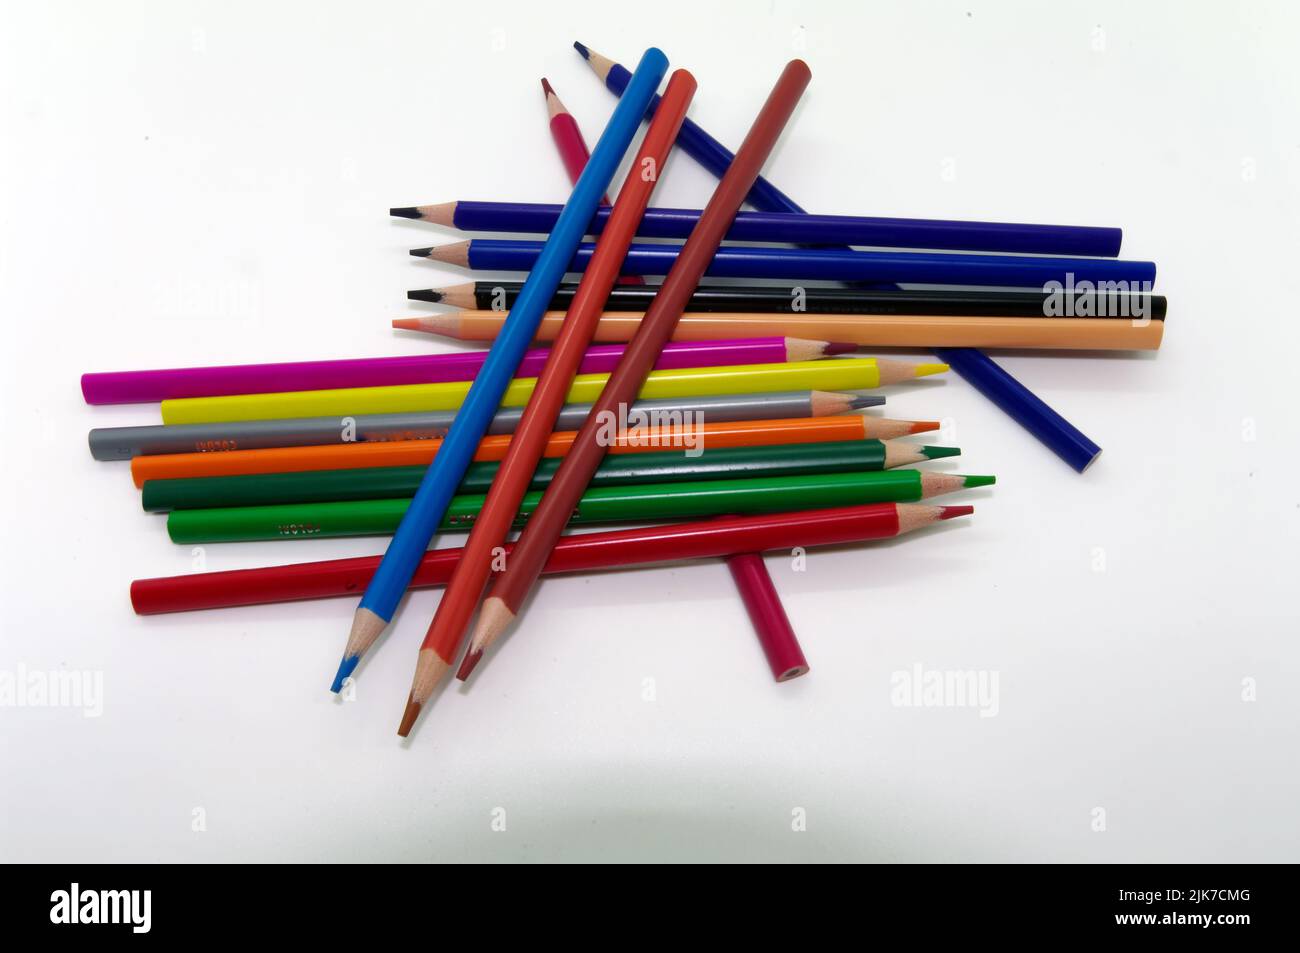 Painting and drawing: Different colored pencils in front of white background arranged crosswise Stock Photo